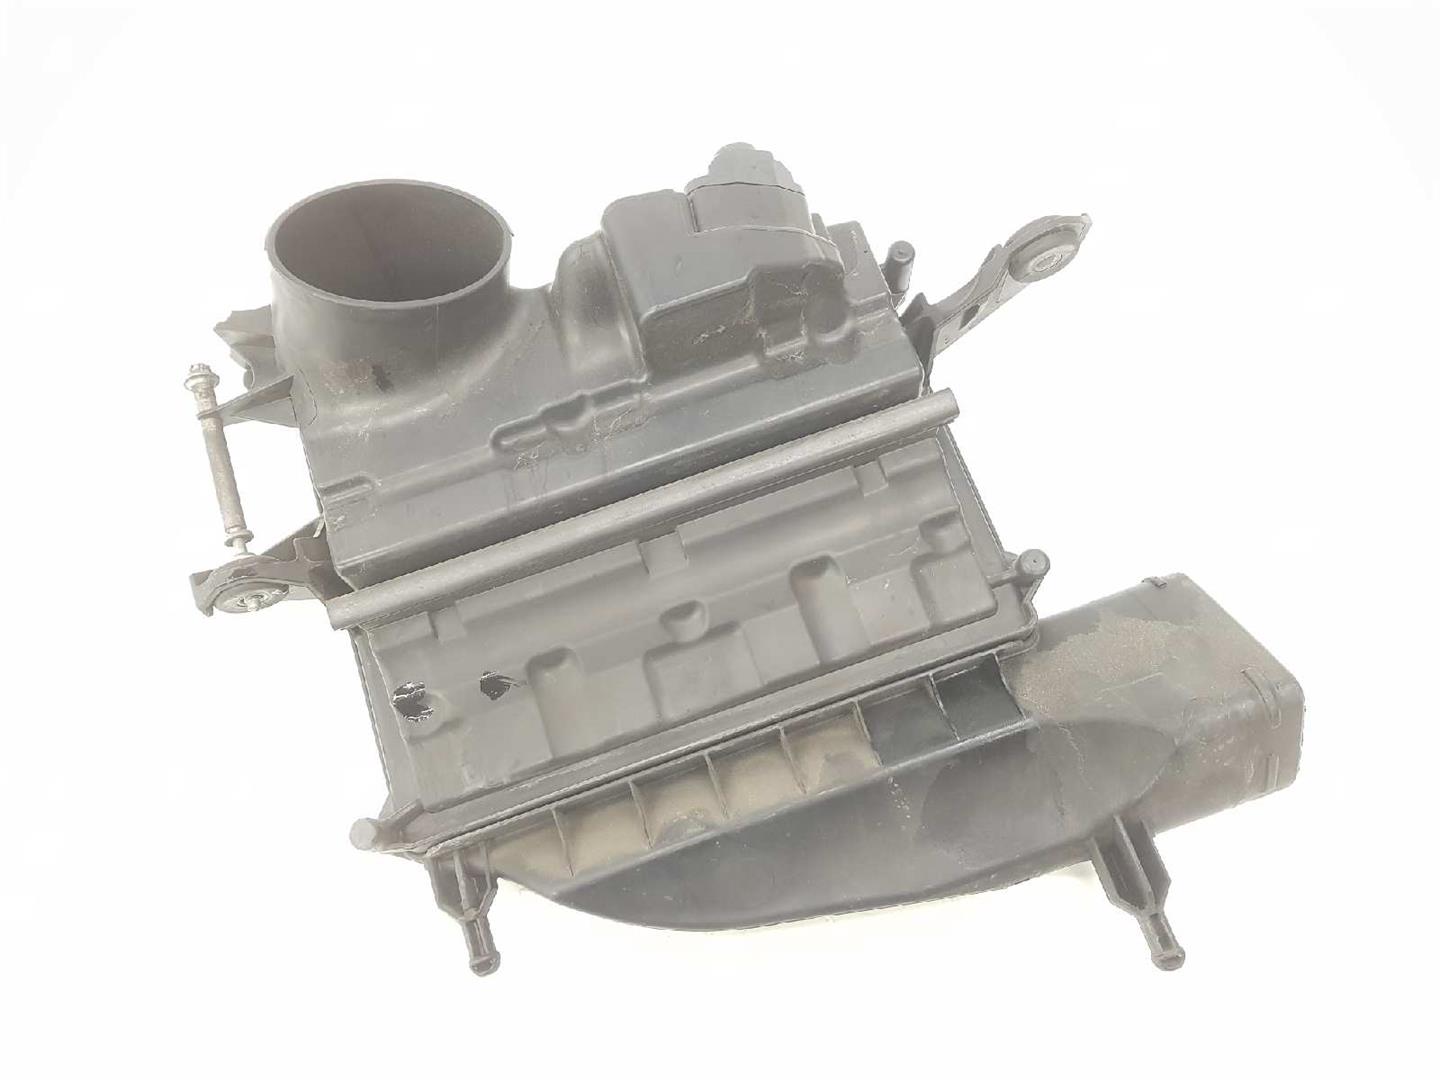 MERCEDES-BENZ M-Class W164 (2005-2011) Other Engine Compartment Parts A6420902101, A6420902101 19743320